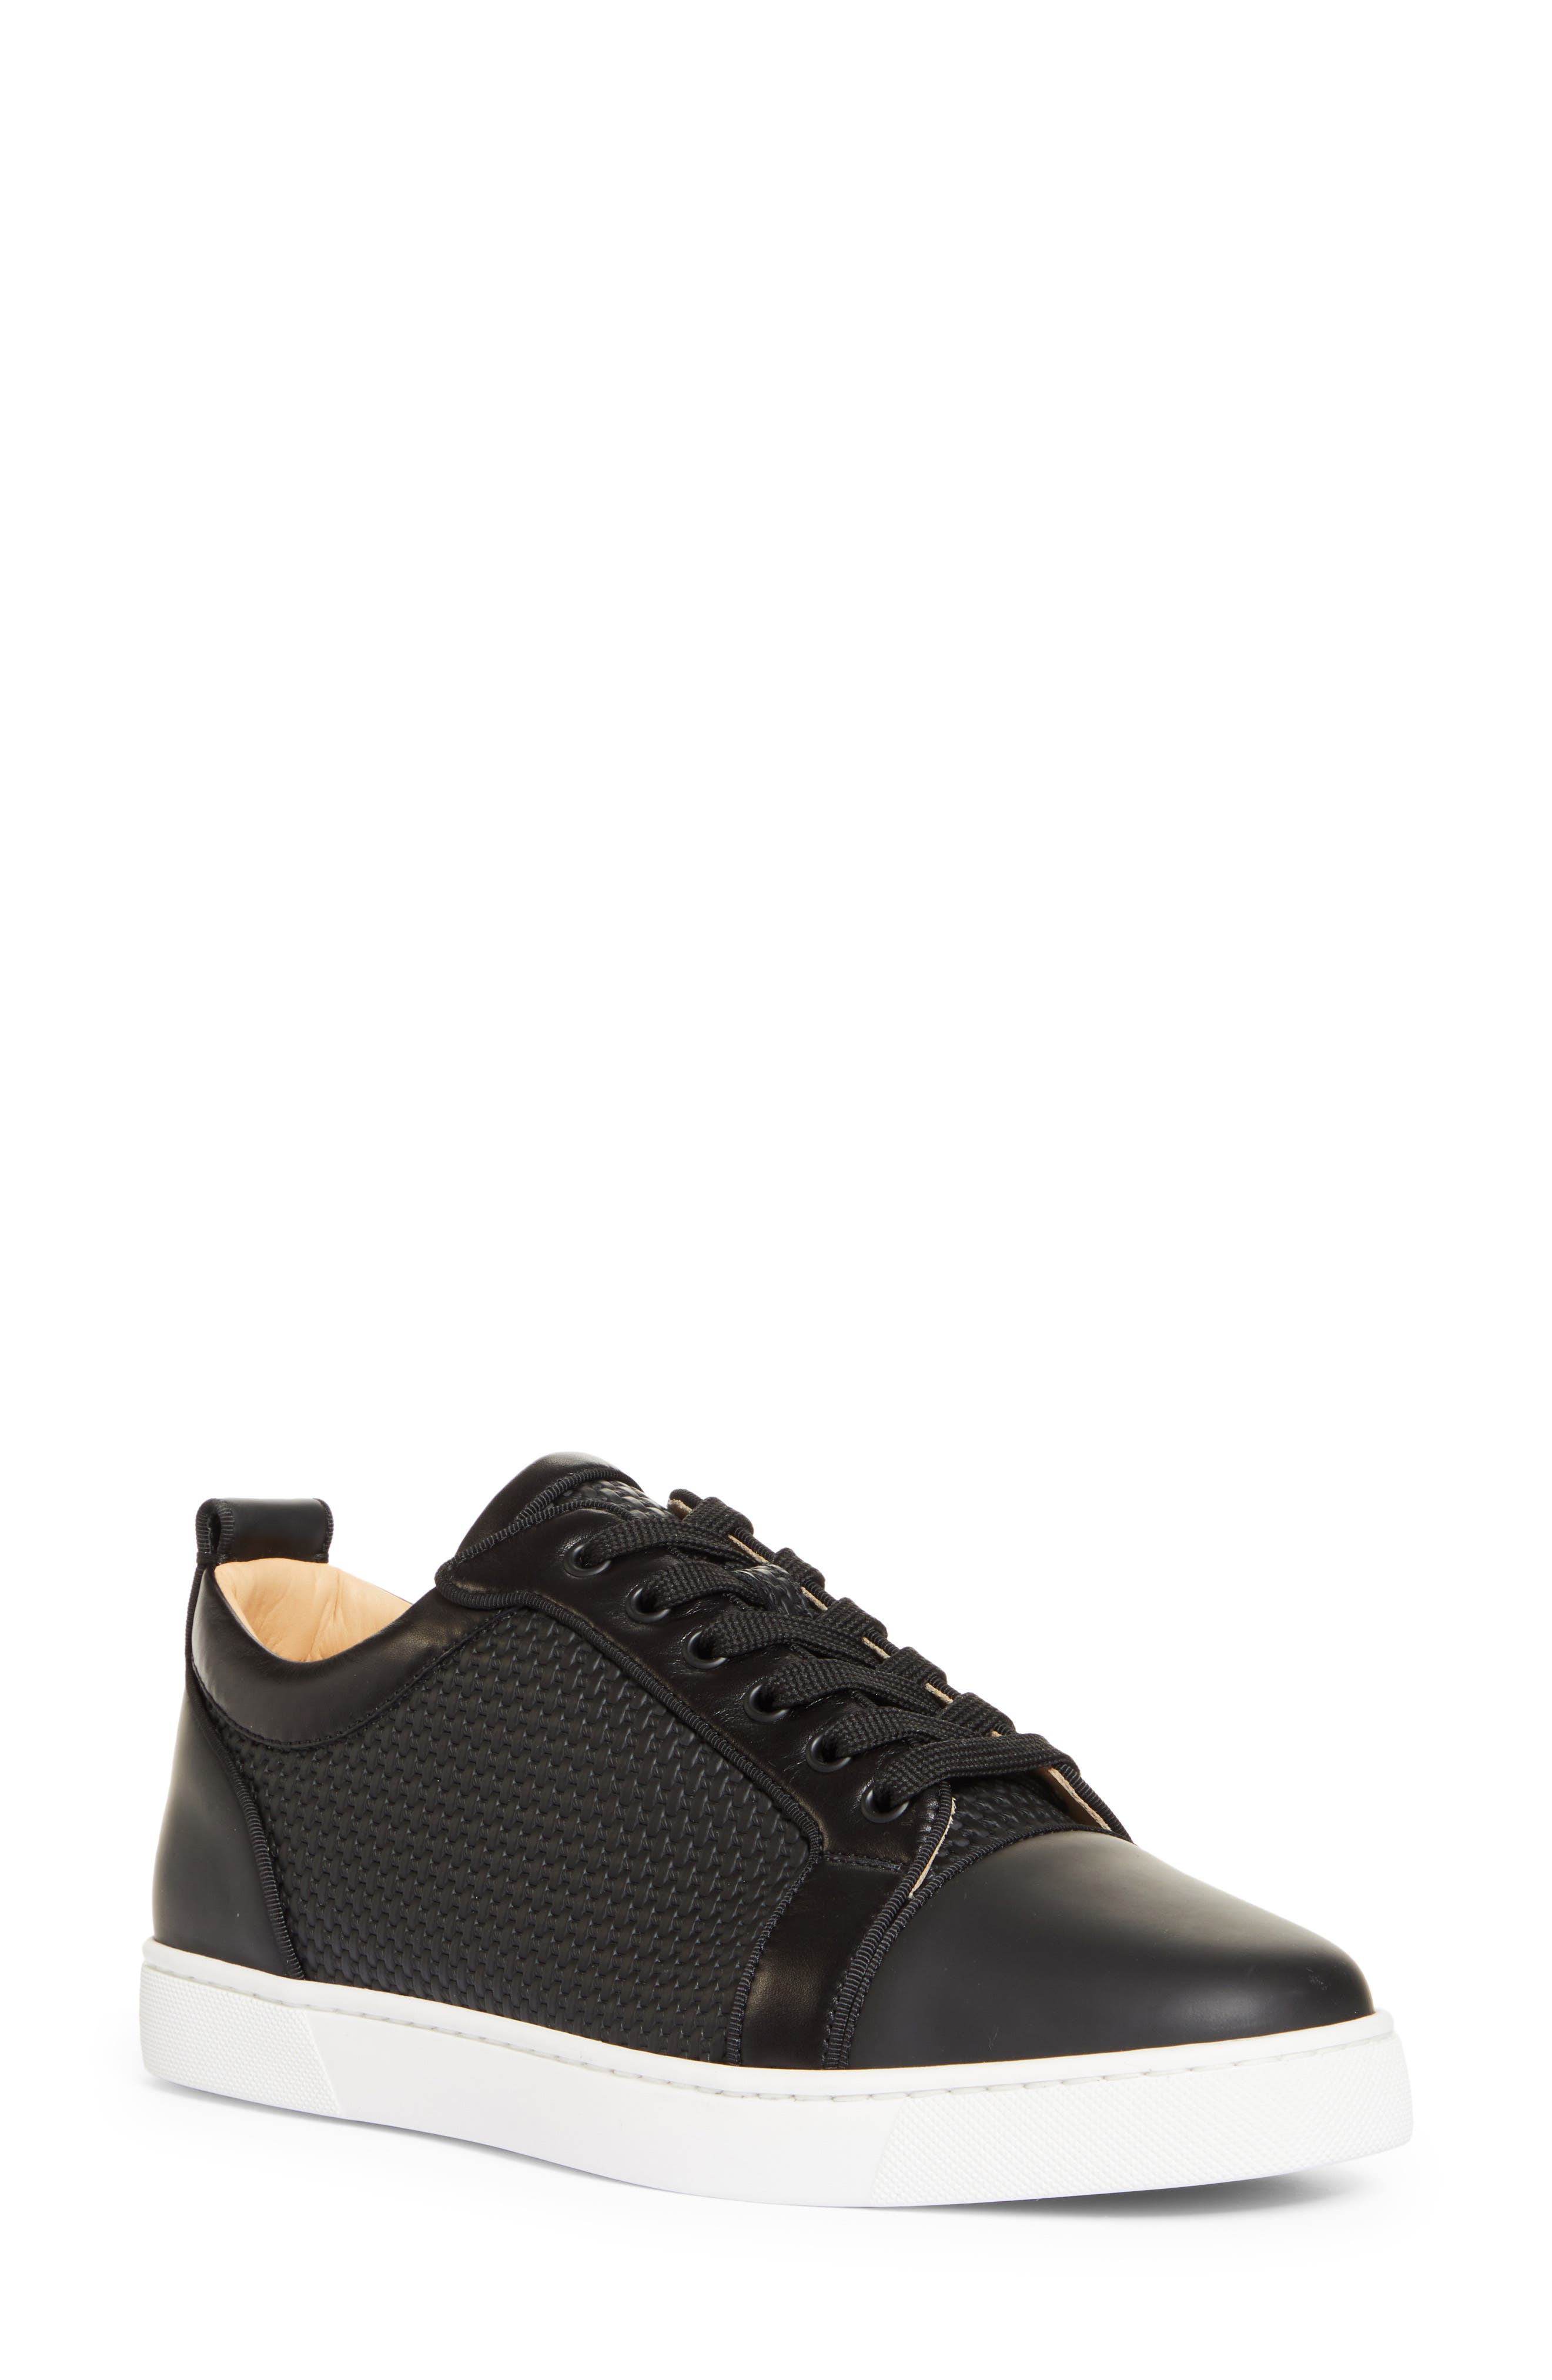 Men's Christian Louboutin Sneakers \u0026 Athletic Shoes | Nordstrom